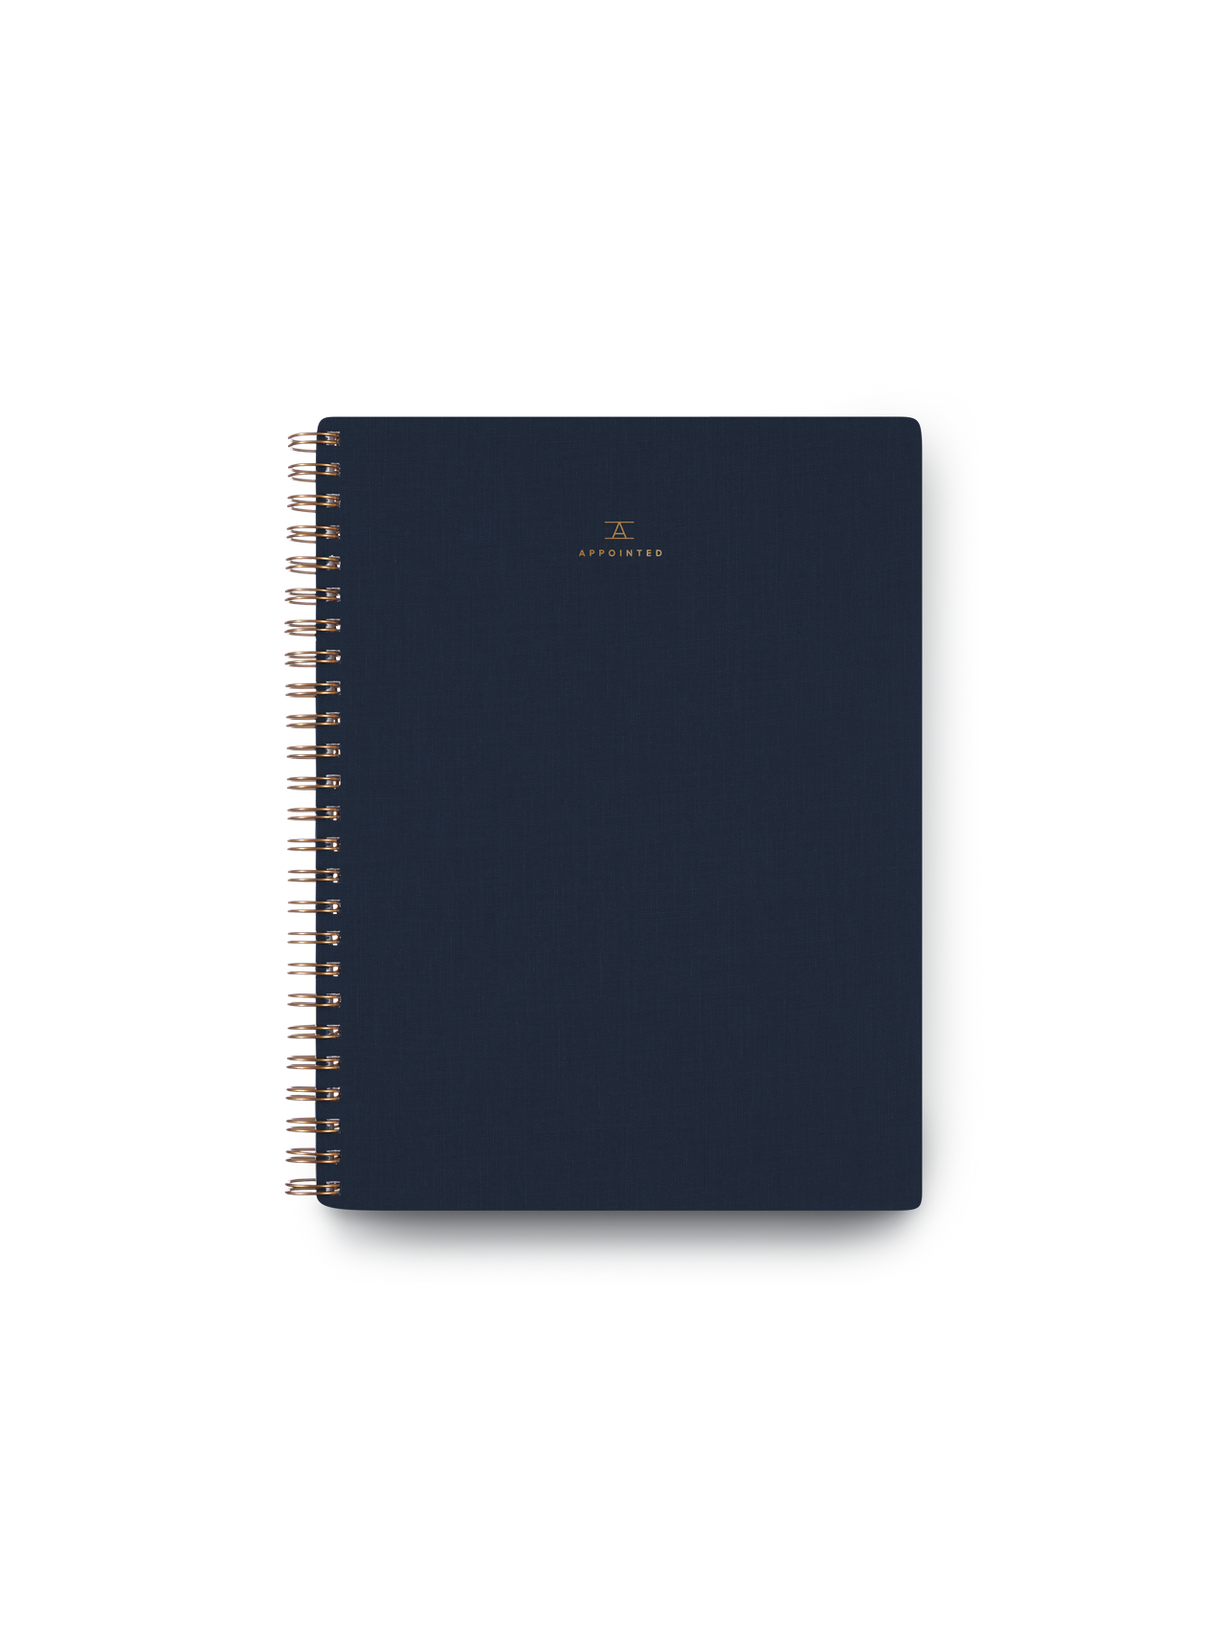 Appointed Notebook with bookcloth cover and brass wire-o binding front view || Oxford Blue